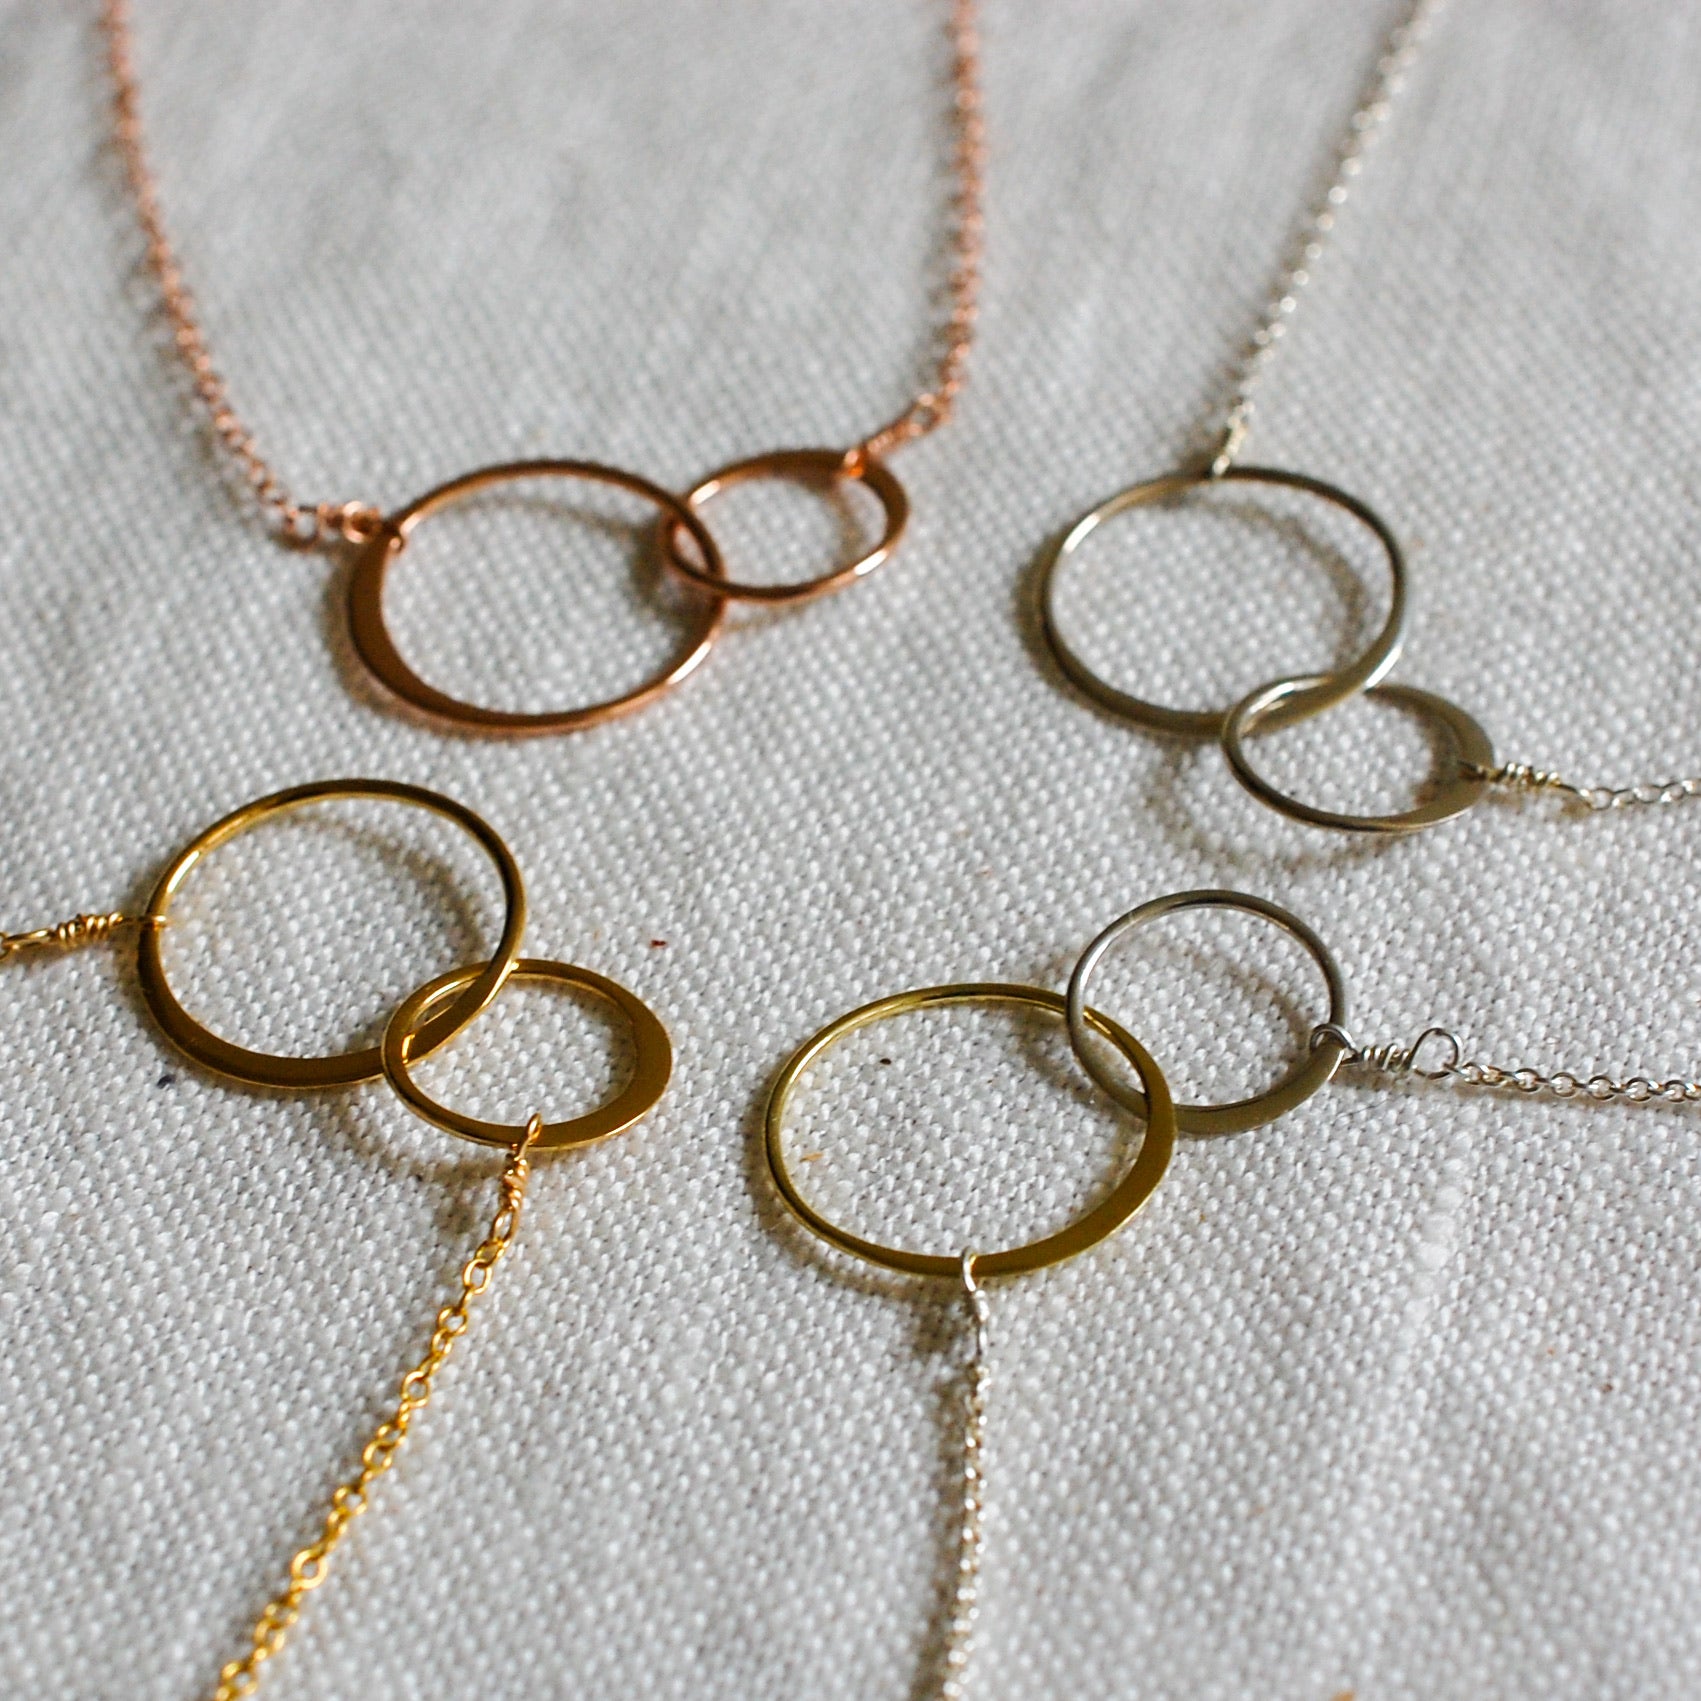 Buy Interlocking Double Circle Necklace 14k Yellow Gold / Unity Link  Infinity Necklace / Solid Gold / Layering Necklace / Gift for Her Online in  India - Etsy